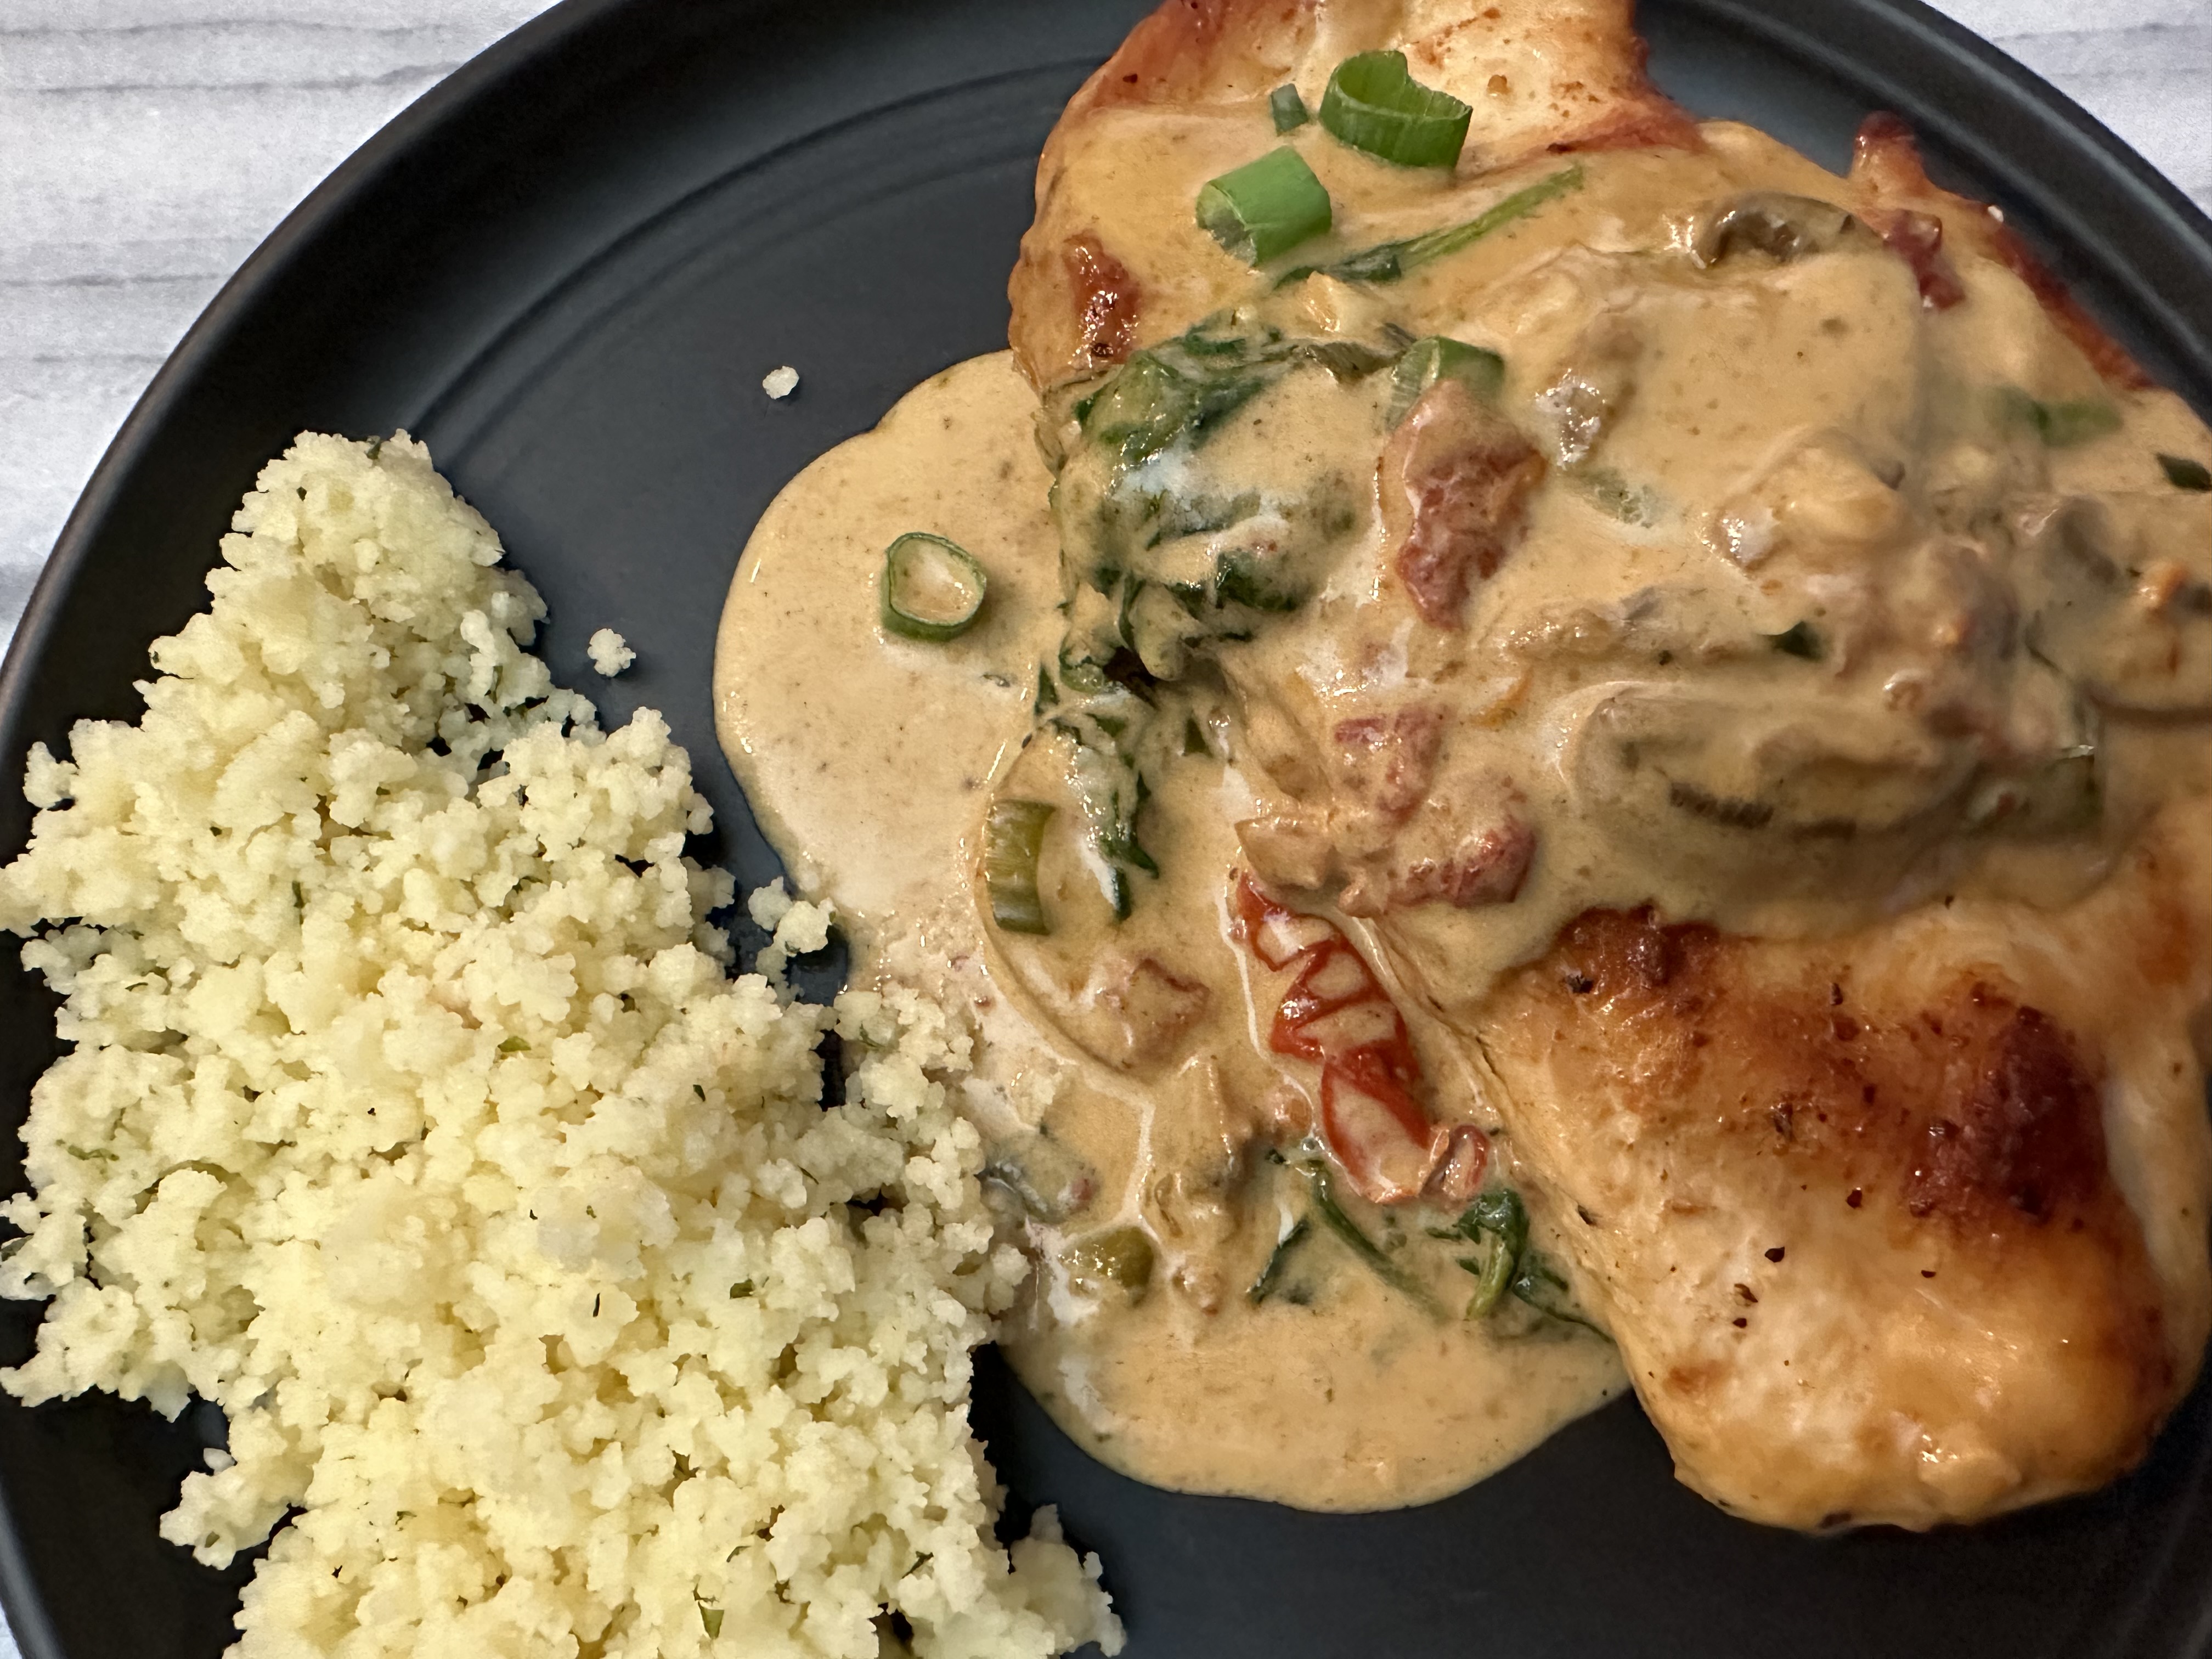 Tuscan chicken in a creamy sauce.